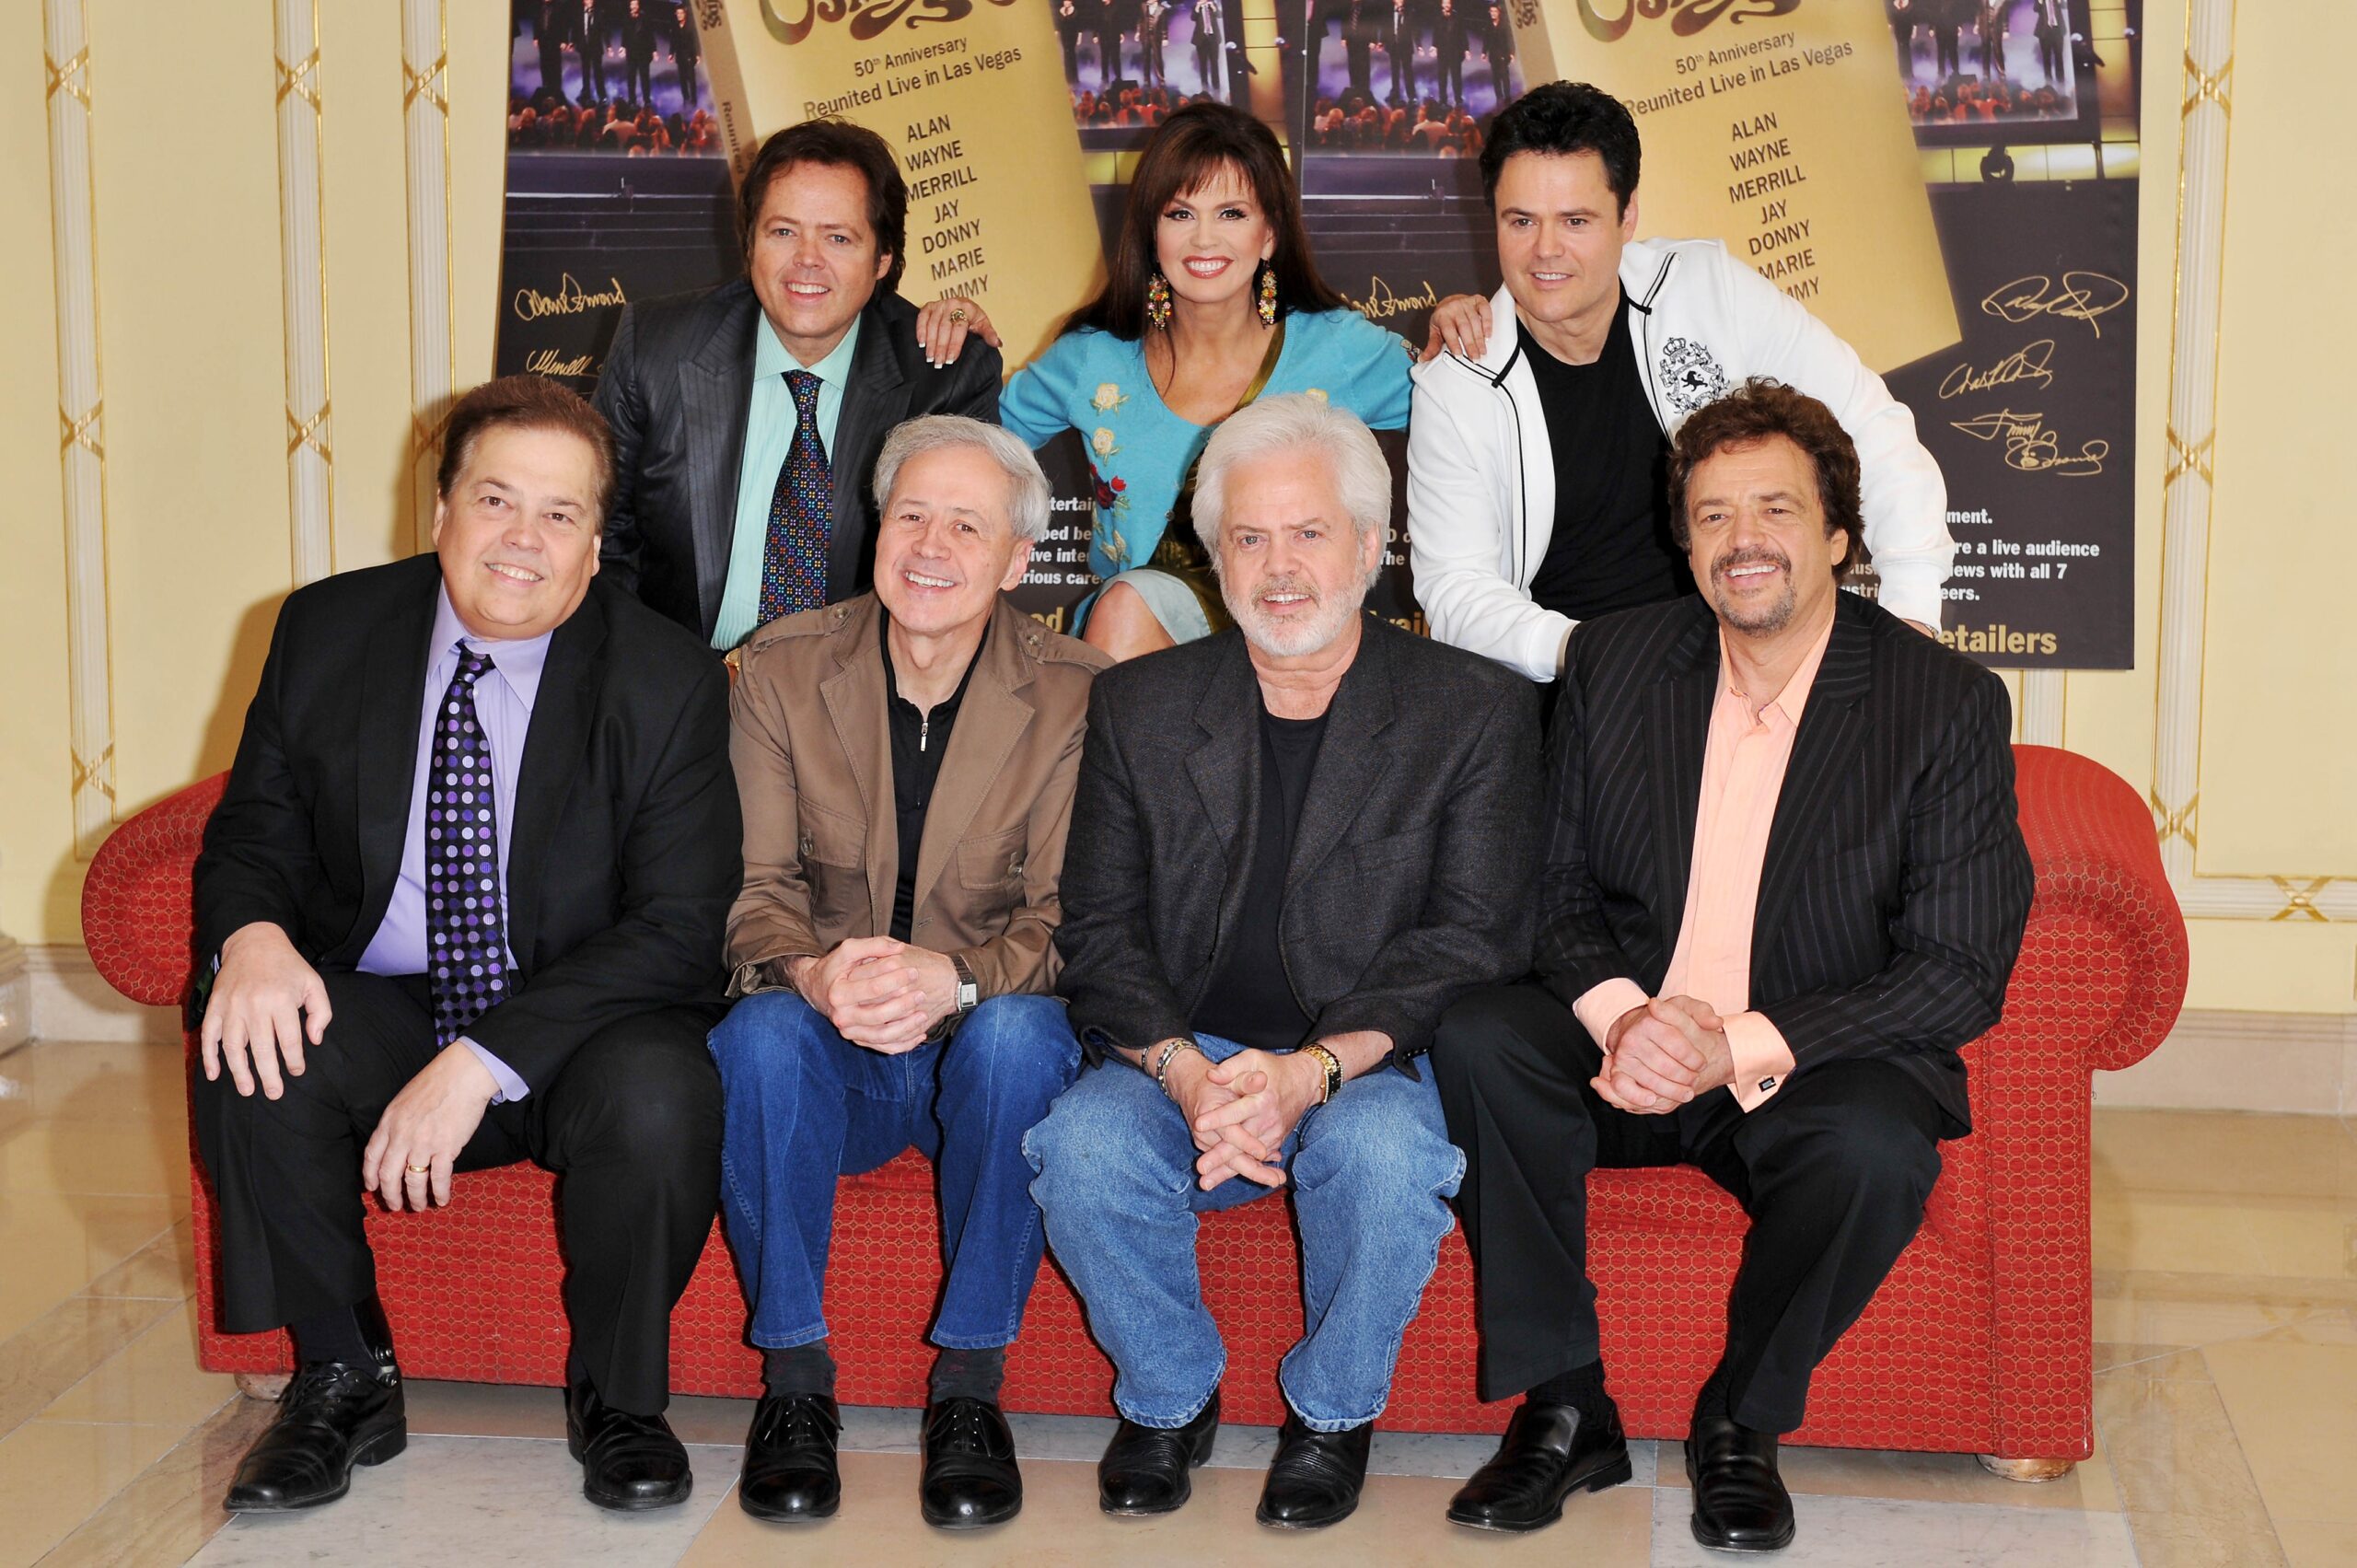 Who is the richest Osmond brother?